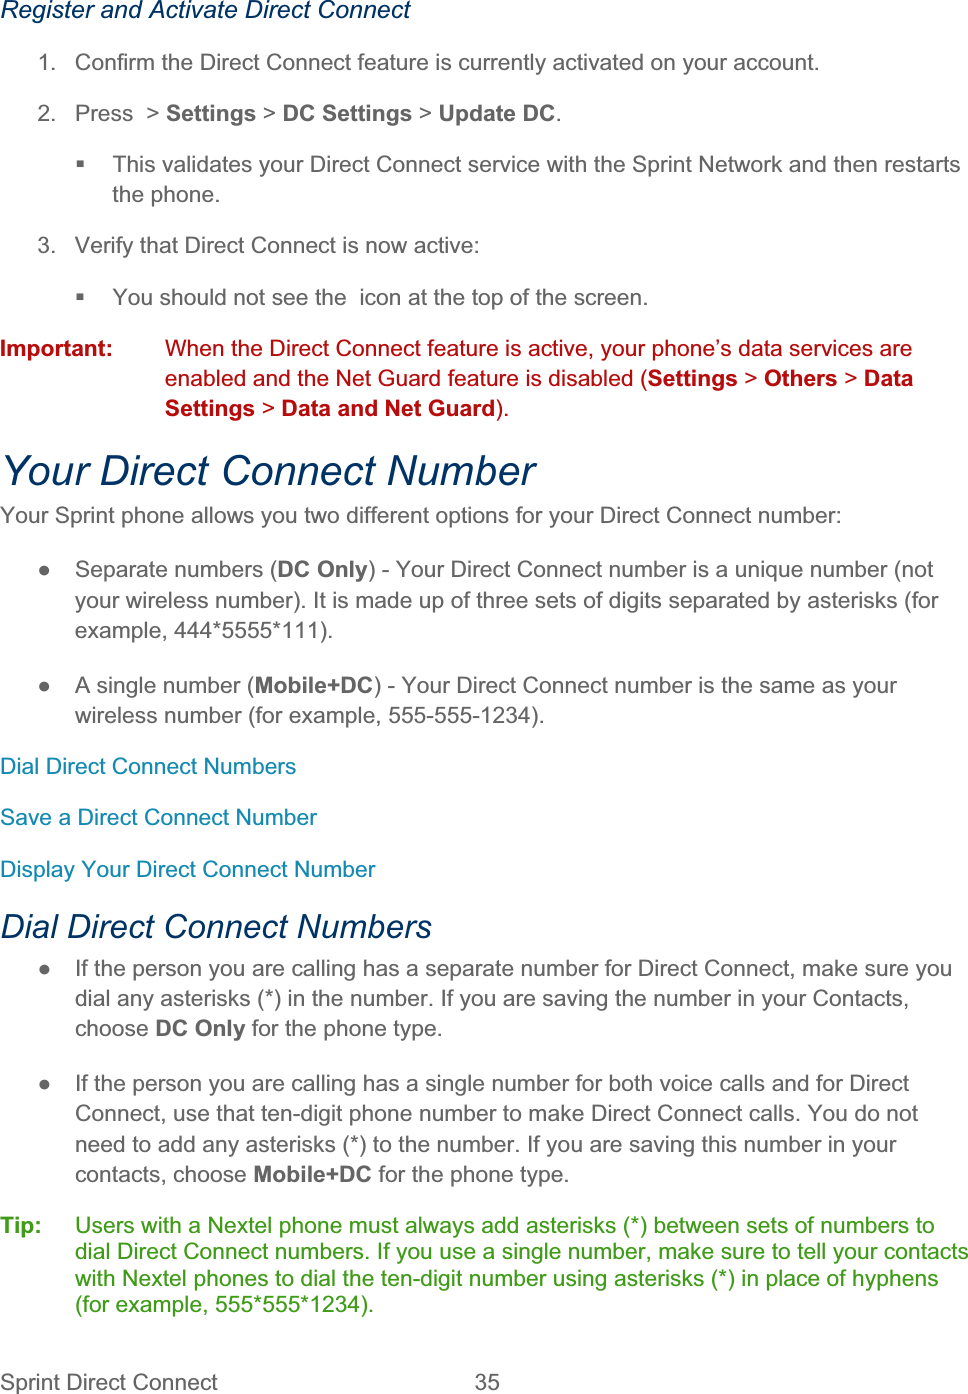 Sprint Direct Connect  35   Register and Activate Direct Connect 1.  Confirm the Direct Connect feature is currently activated on your account. 2.  Press  &gt; Settings &gt; DC Settings &gt; Update DC.  This validates your Direct Connect service with the Sprint Network and then restarts the phone. 3.  Verify that Direct Connect is now active:   You should not see the  icon at the top of the screen.  Important:  When the Direct Connect feature is active, your phone’s data services are enabled and the Net Guard feature is disabled (Settings &gt; Others &gt; DataSettings &gt; Data and Net Guard).Your Direct Connect Number Your Sprint phone allows you two different options for your Direct Connect number: ŏ  Separate numbers (DC Only) - Your Direct Connect number is a unique number (not your wireless number). It is made up of three sets of digits separated by asterisks (for example, 444*5555*111). ŏ  A single number (Mobile+DC) - Your Direct Connect number is the same as your wireless number (for example, 555-555-1234). Dial Direct Connect Numbers Save a Direct Connect Number Display Your Direct Connect Number Dial Direct Connect Numbers ŏ  If the person you are calling has a separate number for Direct Connect, make sure you dial any asterisks (*) in the number. If you are saving the number in your Contacts, choose DC Only for the phone type. ŏ  If the person you are calling has a single number for both voice calls and for Direct Connect, use that ten-digit phone number to make Direct Connect calls. You do not need to add any asterisks (*) to the number. If you are saving this number in your contacts, choose Mobile+DC for the phone type. Tip:   Users with a Nextel phone must always add asterisks (*) between sets of numbers to dial Direct Connect numbers. If you use a single number, make sure to tell your contacts with Nextel phones to dial the ten-digit number using asterisks (*) in place of hyphens (for example, 555*555*1234). 